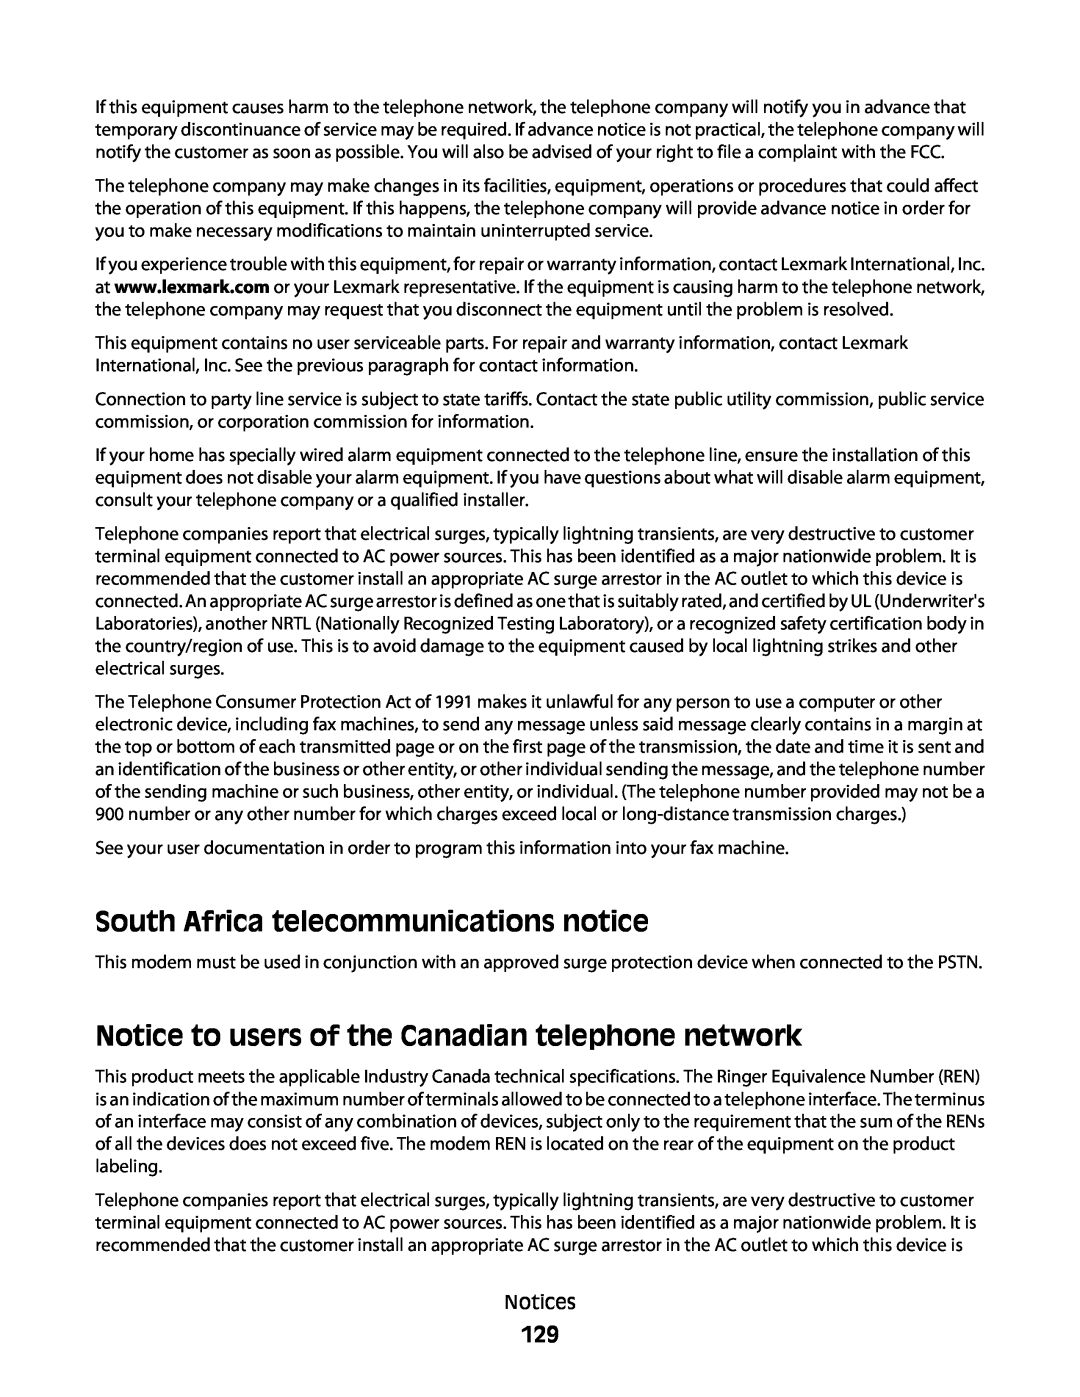 Lexmark S500, 30E, 301 manual South Africa telecommunications notice, Notice to users of the Canadian telephone network 